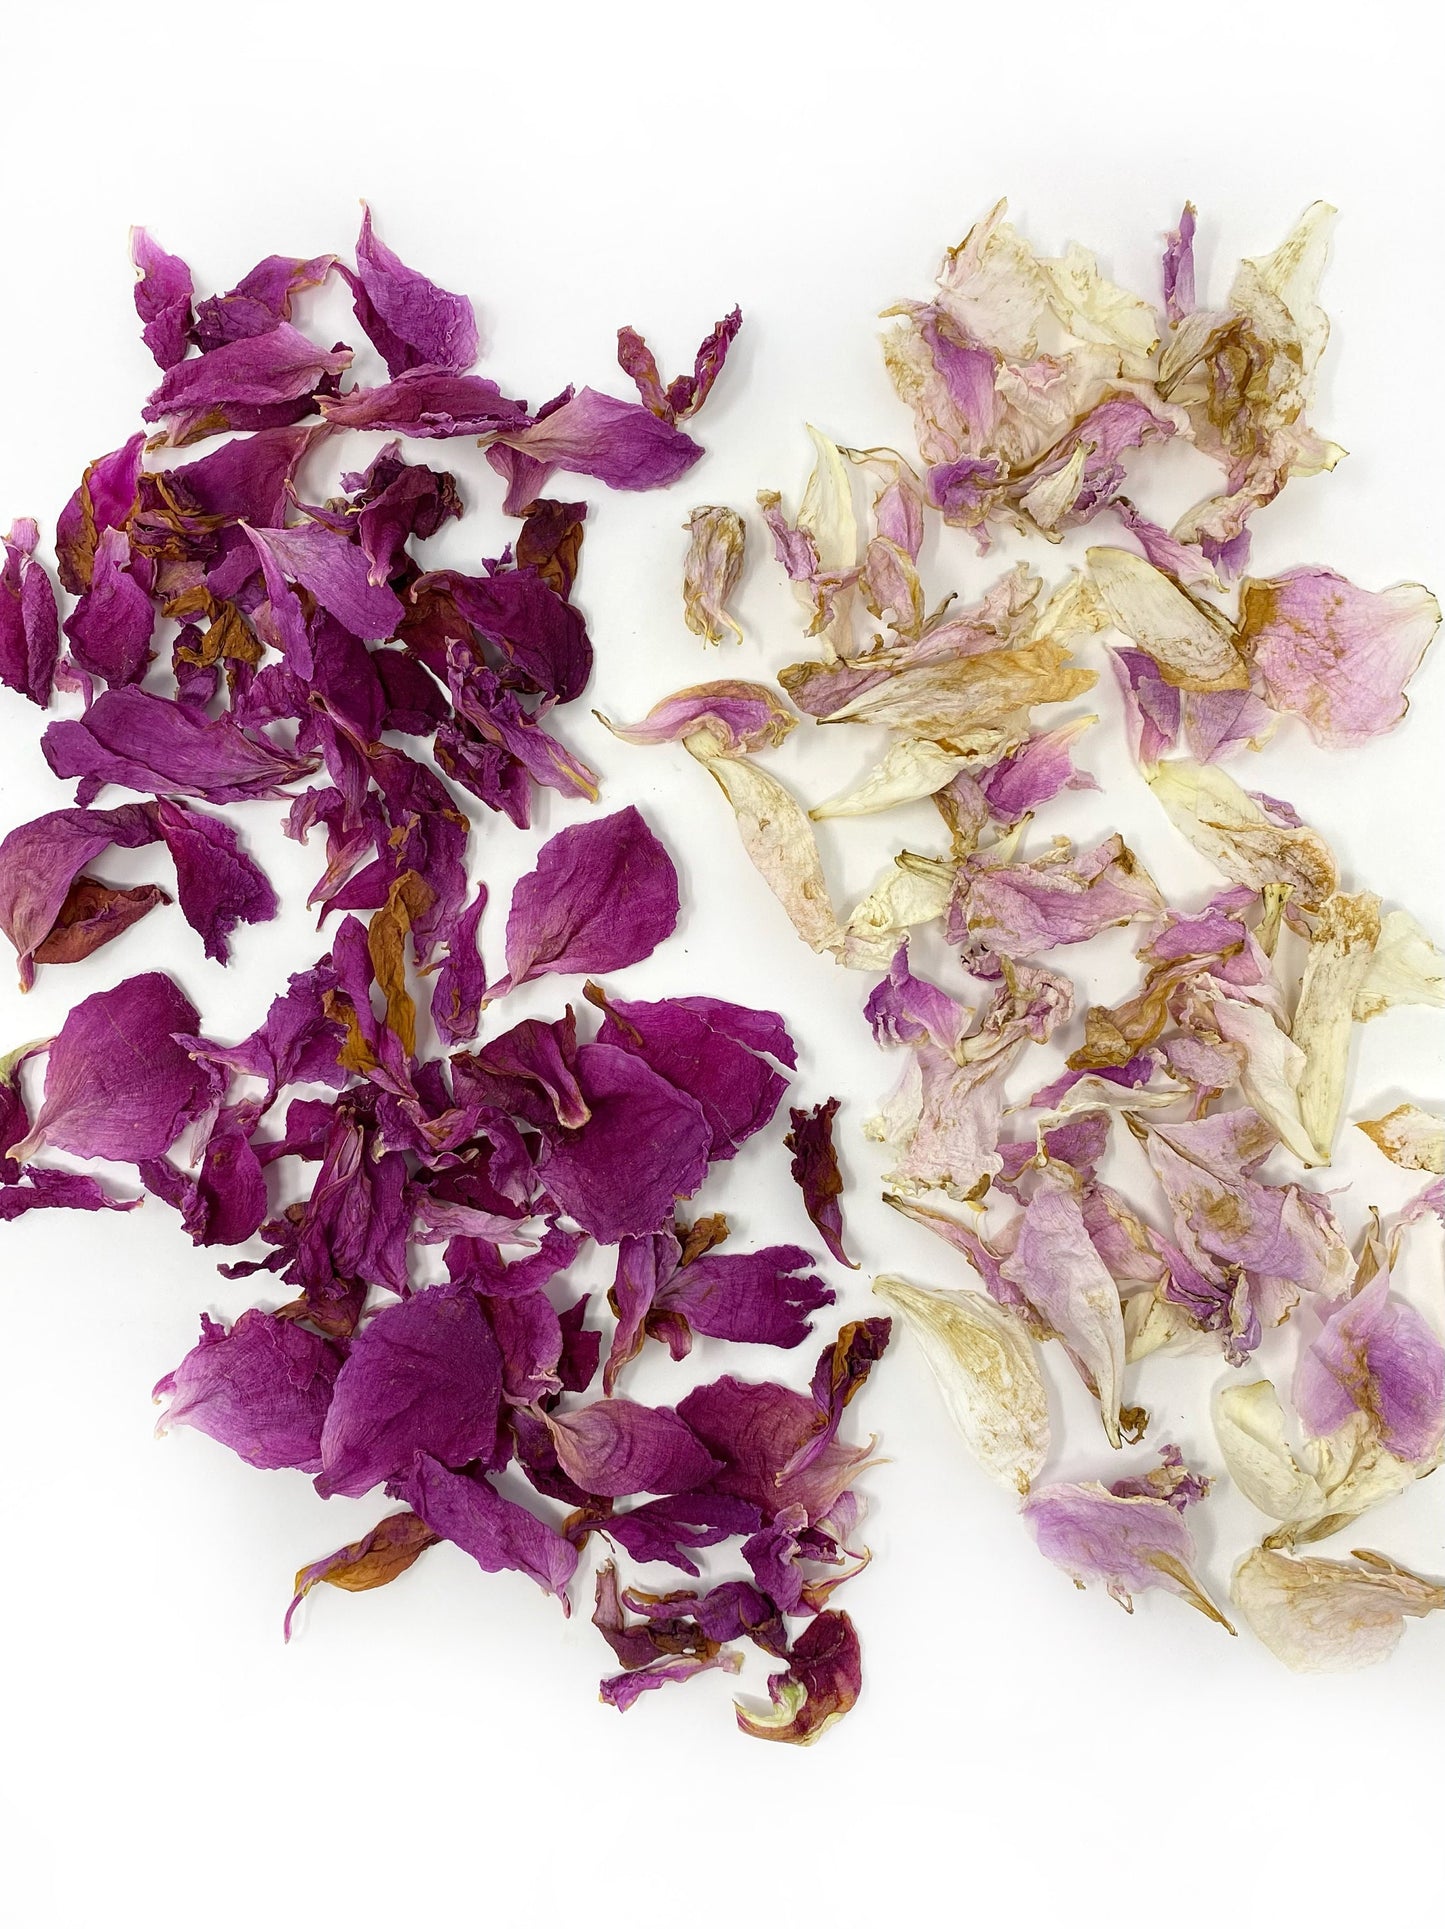 Peony Petals, Potpourri, Dried Petals, Decor, Wedding, Decoration, Filler, Burgundy, White, Dried Flowers, Pink, Brown, Arts and Craft